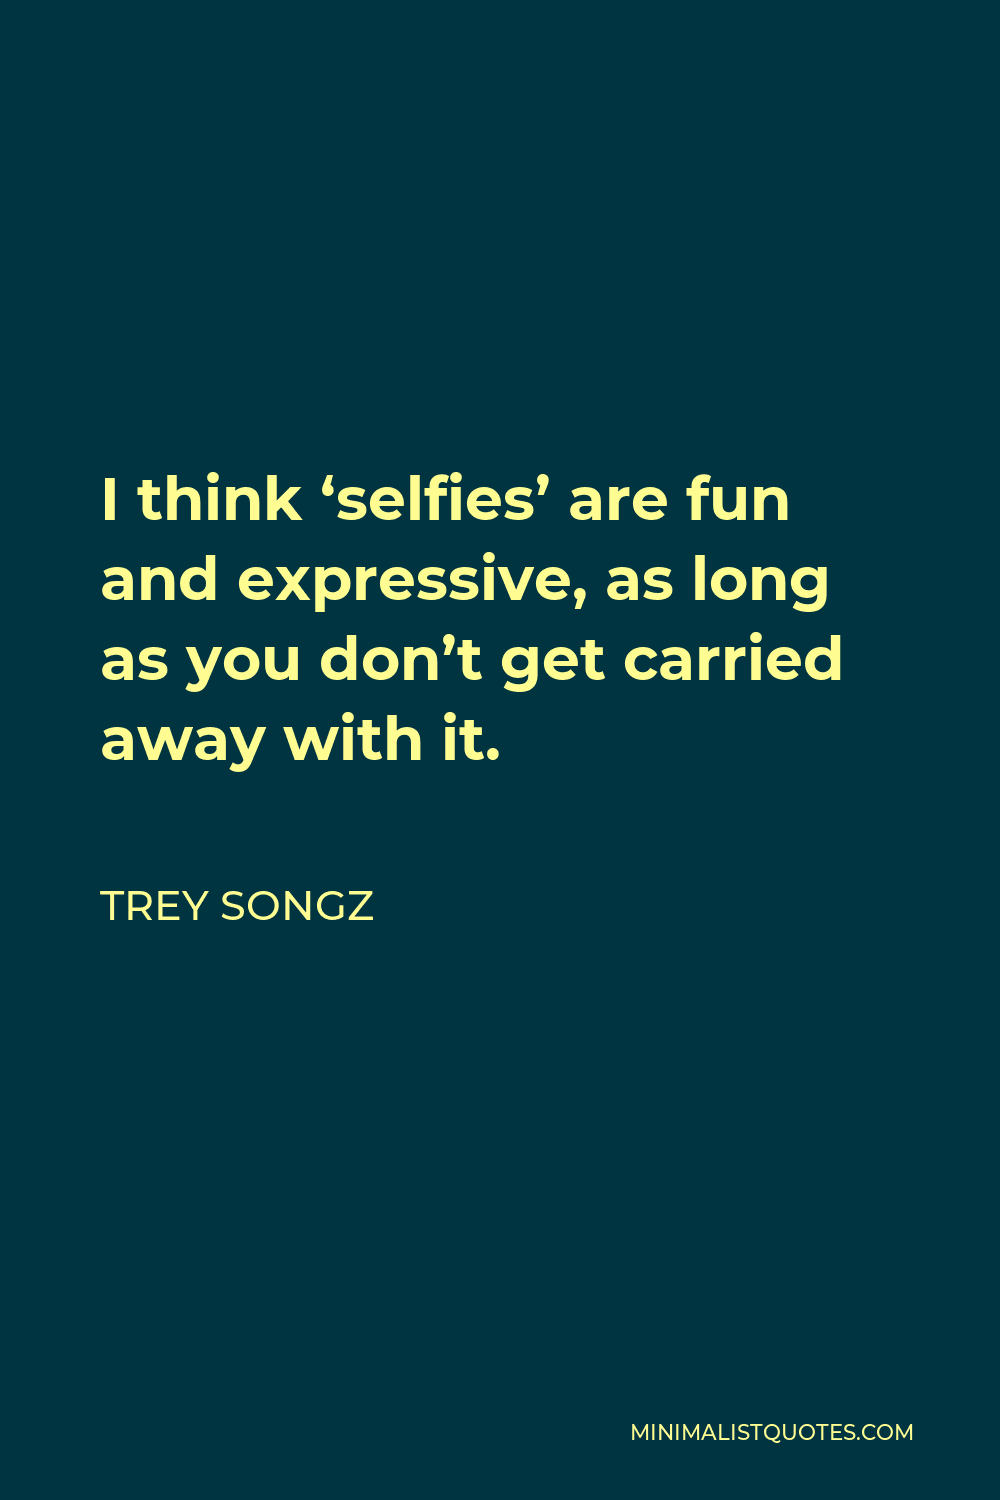 Trey Songz Quote - I think ‘selfies’ are fun and expressive, as long as you don’t get carried away with it.